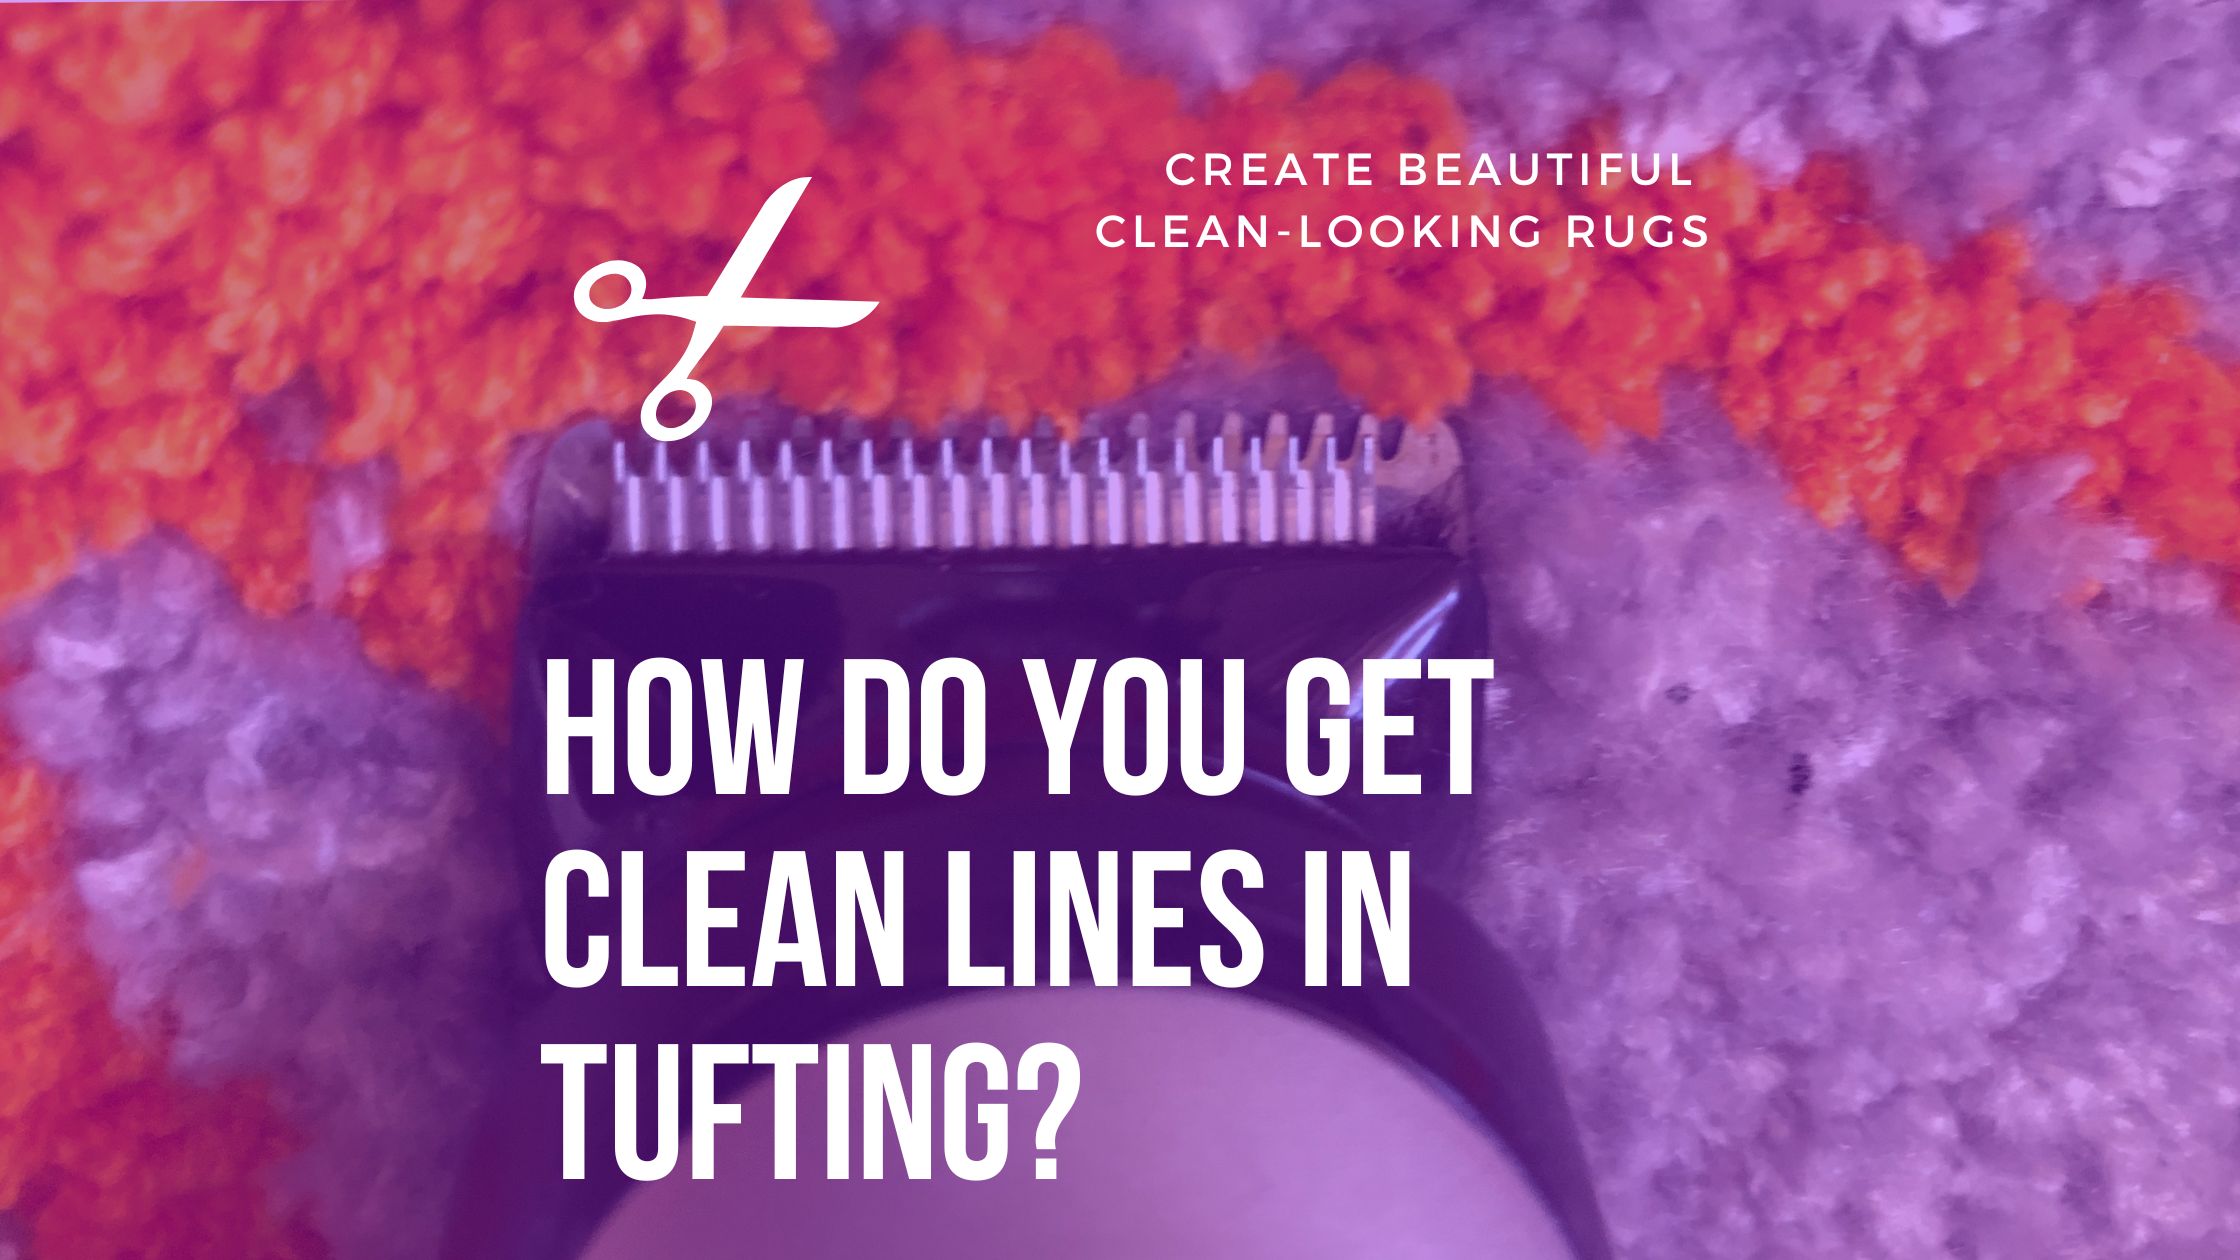 How Do You Get Clean Lines In Tufting?